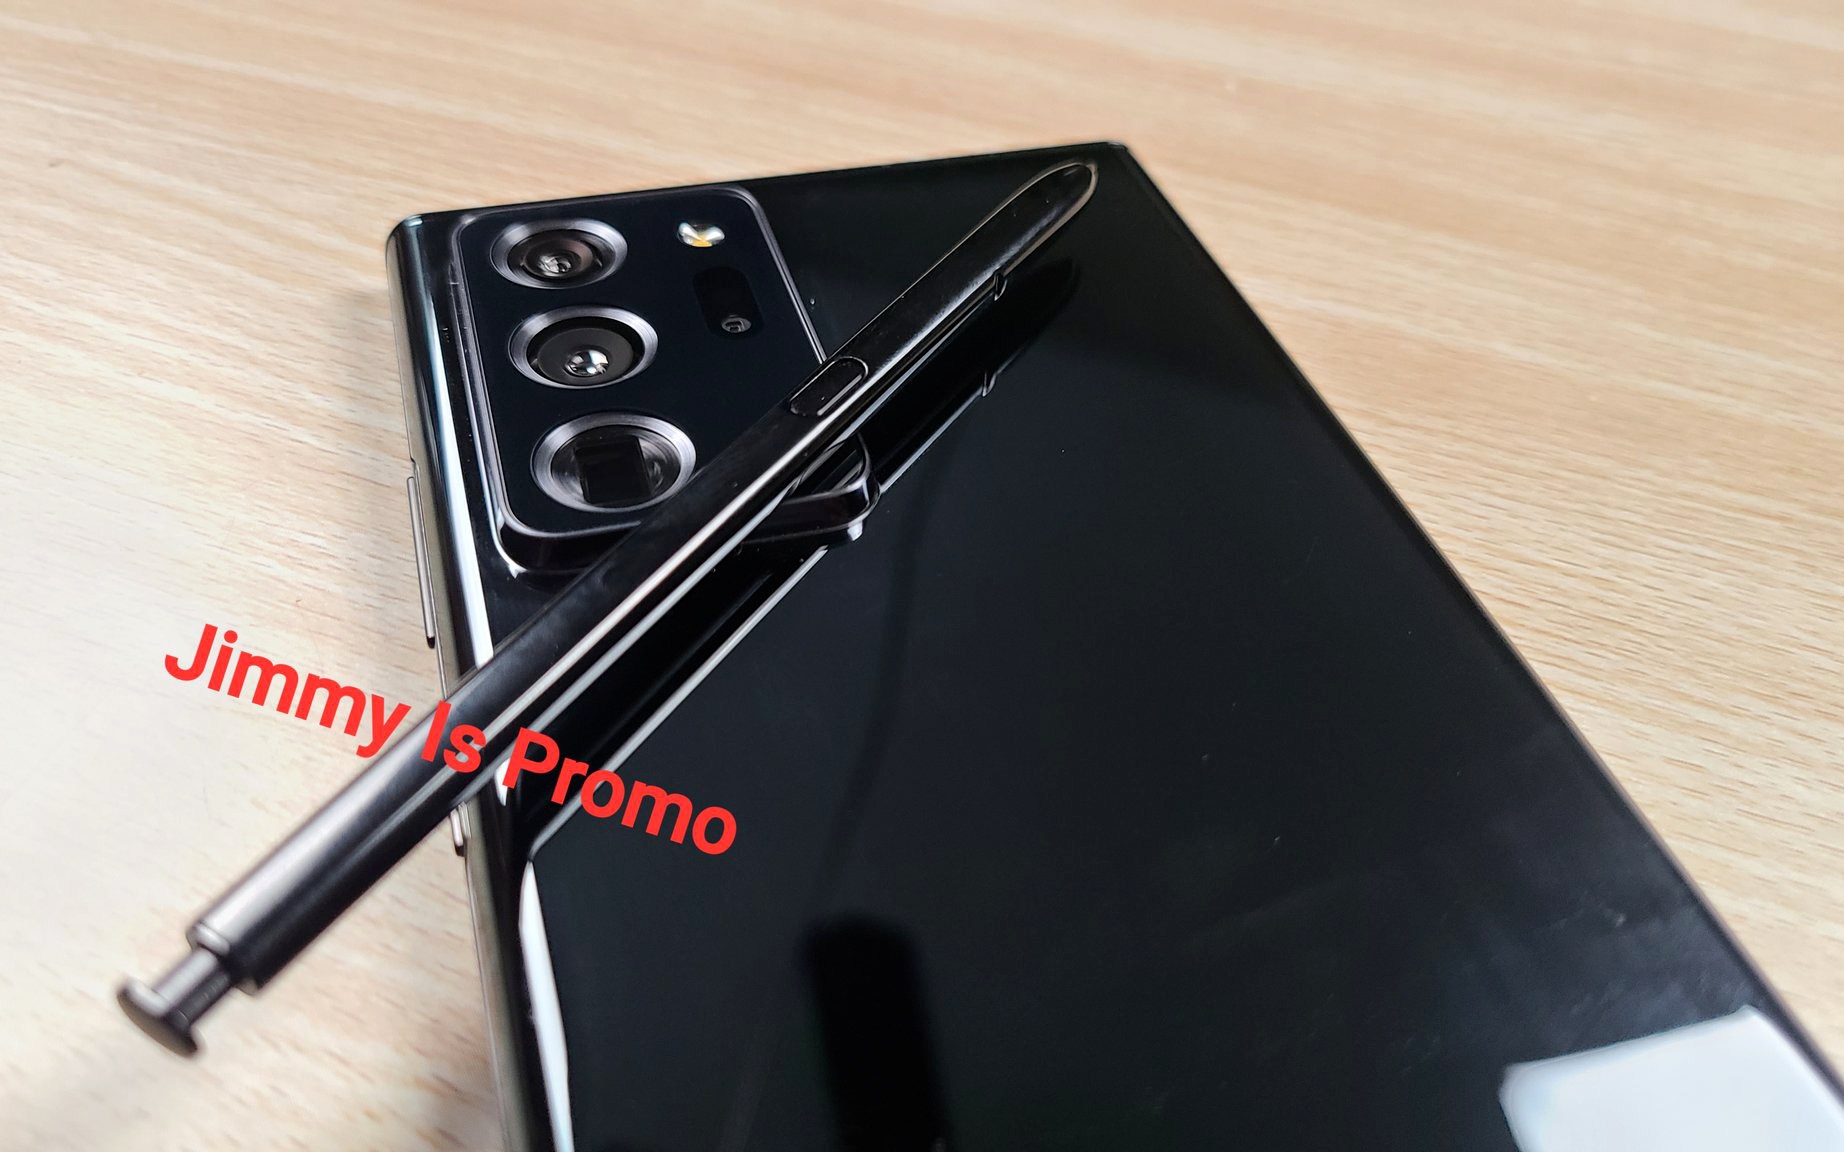 Samsung Galaxy Note 20: Photos show ultra model in the wild